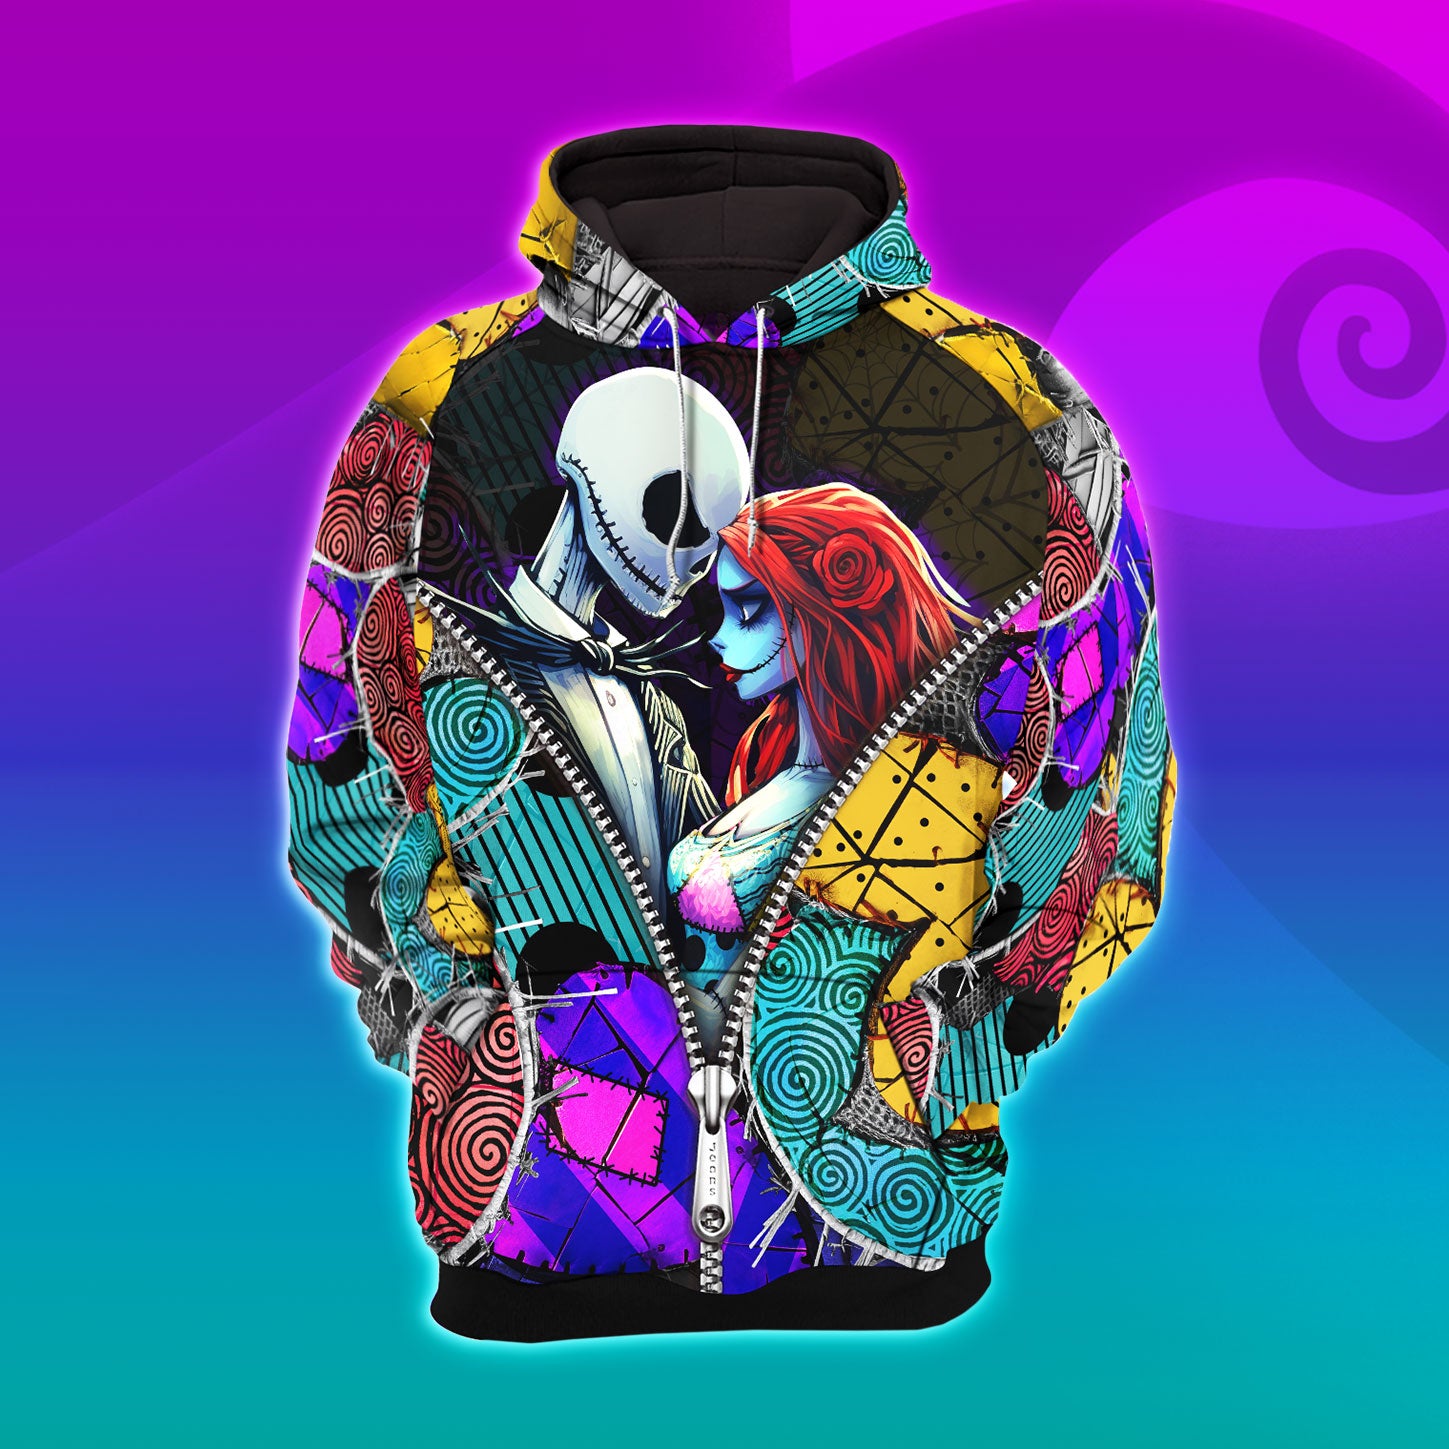 Zipper Couple Nightmare Art Combo Hoodie and Leggings - Dark and edgy matching set with skull designs for a unique and stylish look.